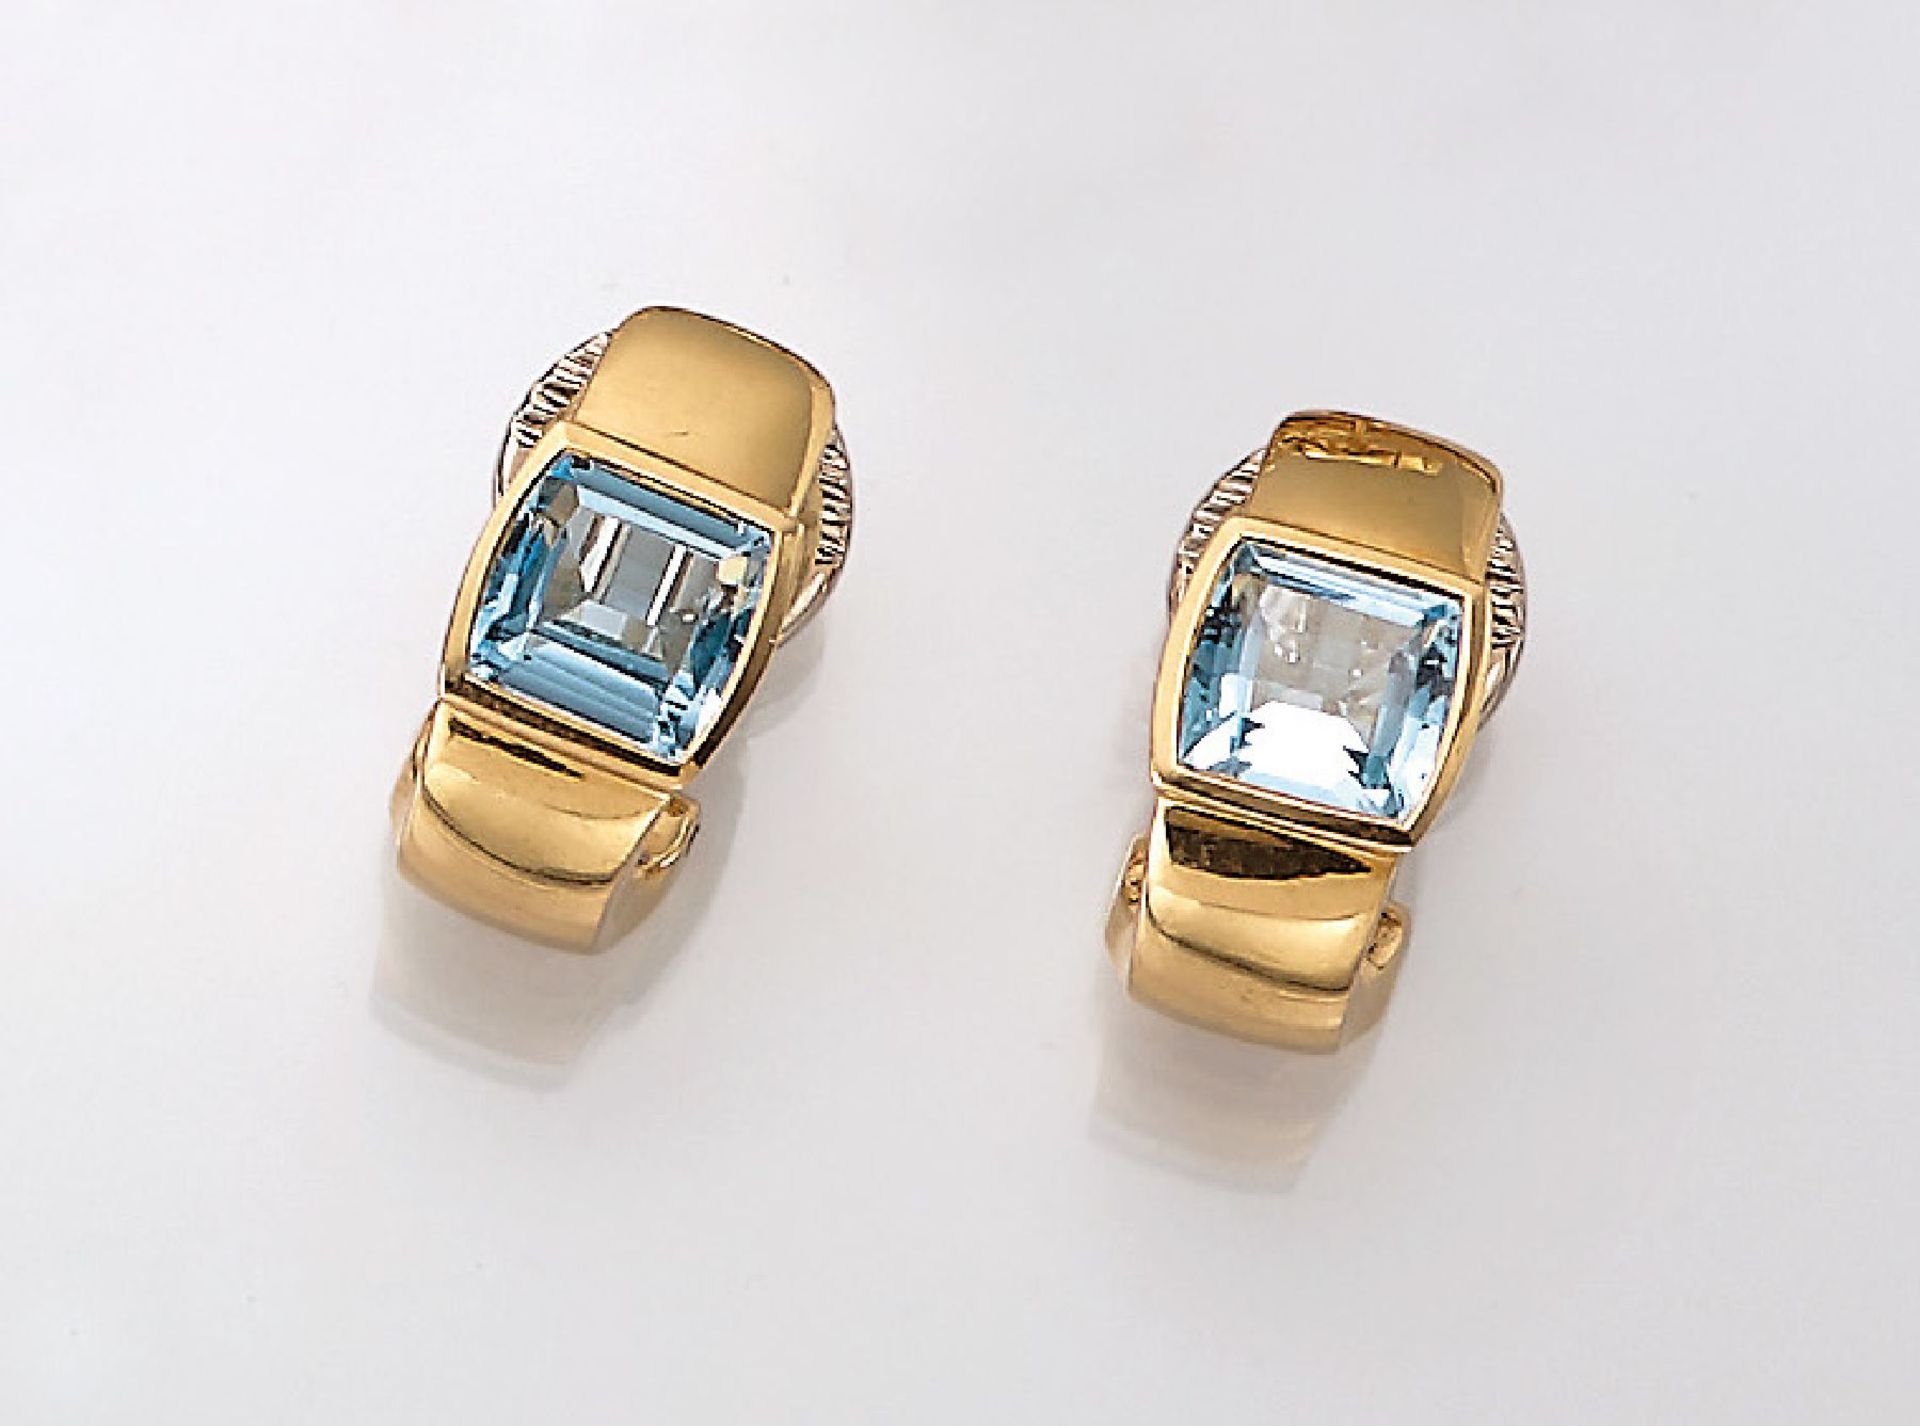 Pair of 18 kt gold earrings with topazes , YG 750/000, each 1 blue topaz in cushion-cut, solid